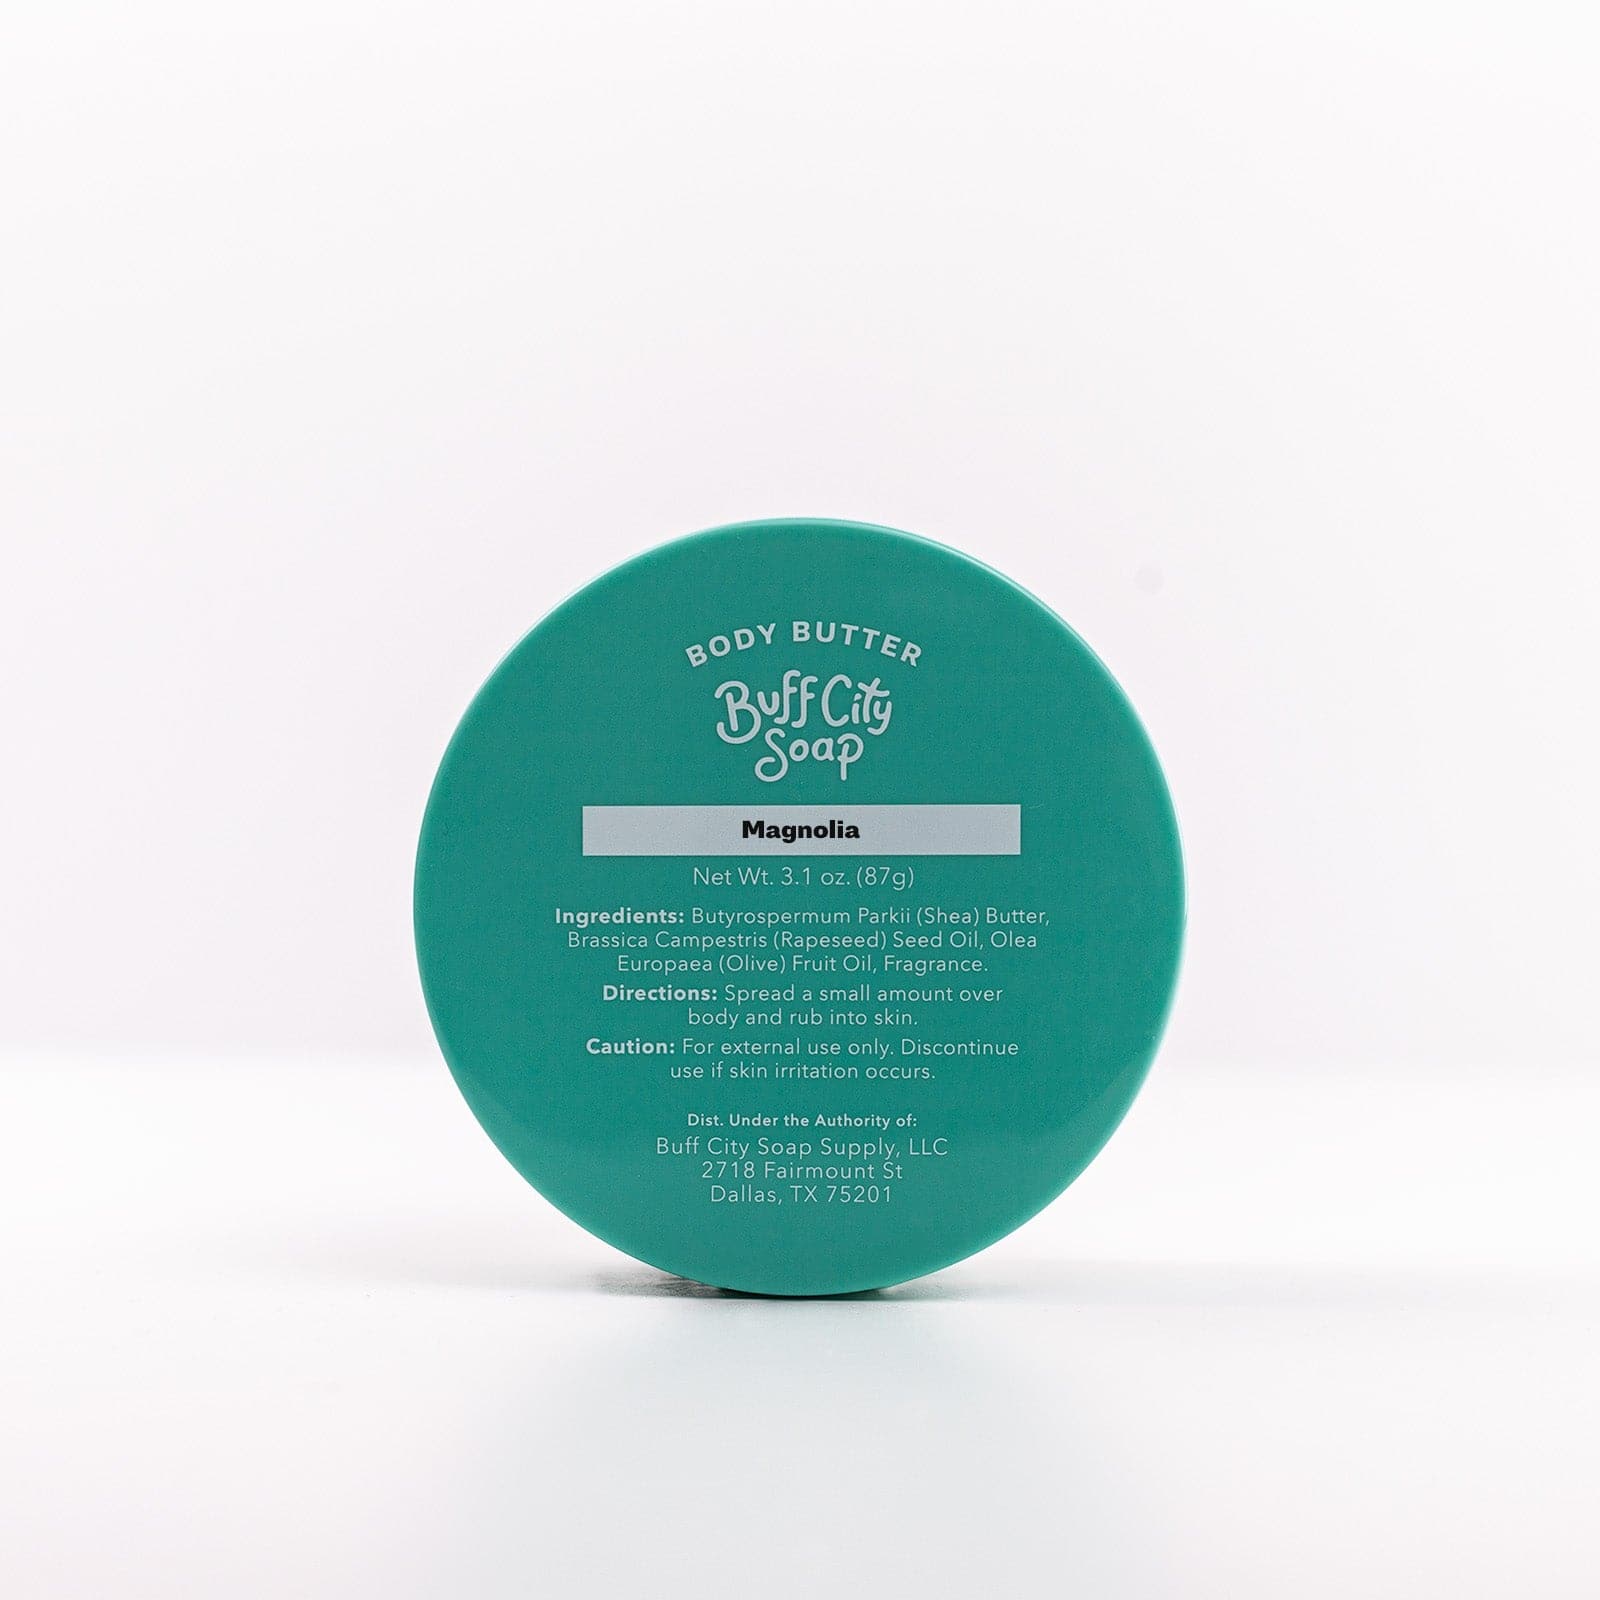 top of Buff City Soap's magnolia body butter listing directions, ingredients and cautions